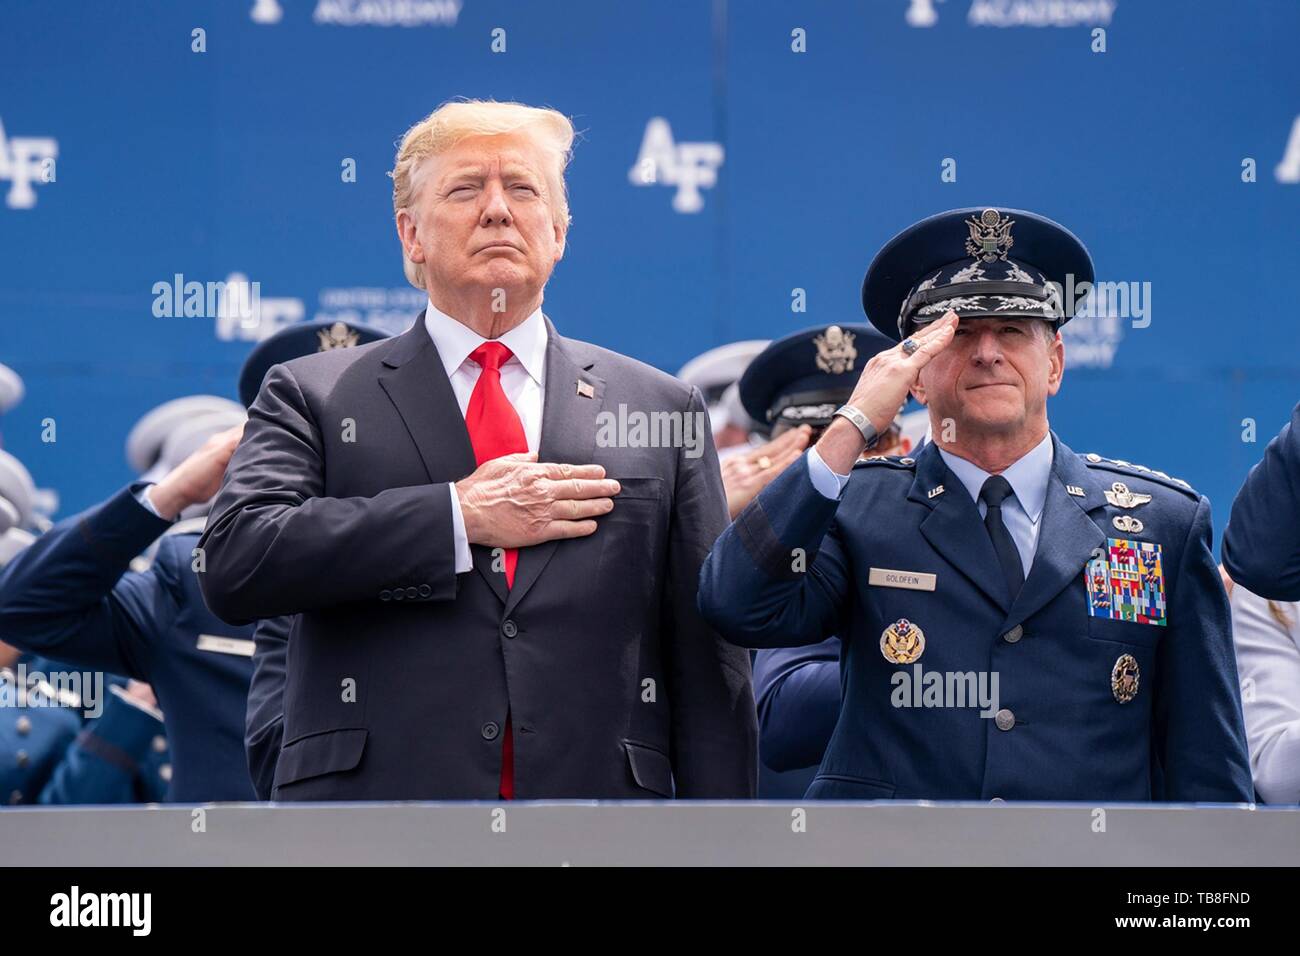 U.S President Donald Trump stands with Air Force Chief of Staff Gen. David Goldfein for the national anthem during the U.S. Air Force Academy Graduation Ceremony at the USAF Academy Falcon Stadium May 30, 2019 in Colorado Springs, Colorado. Credit: Planetpix/Alamy Live News Stock Photo